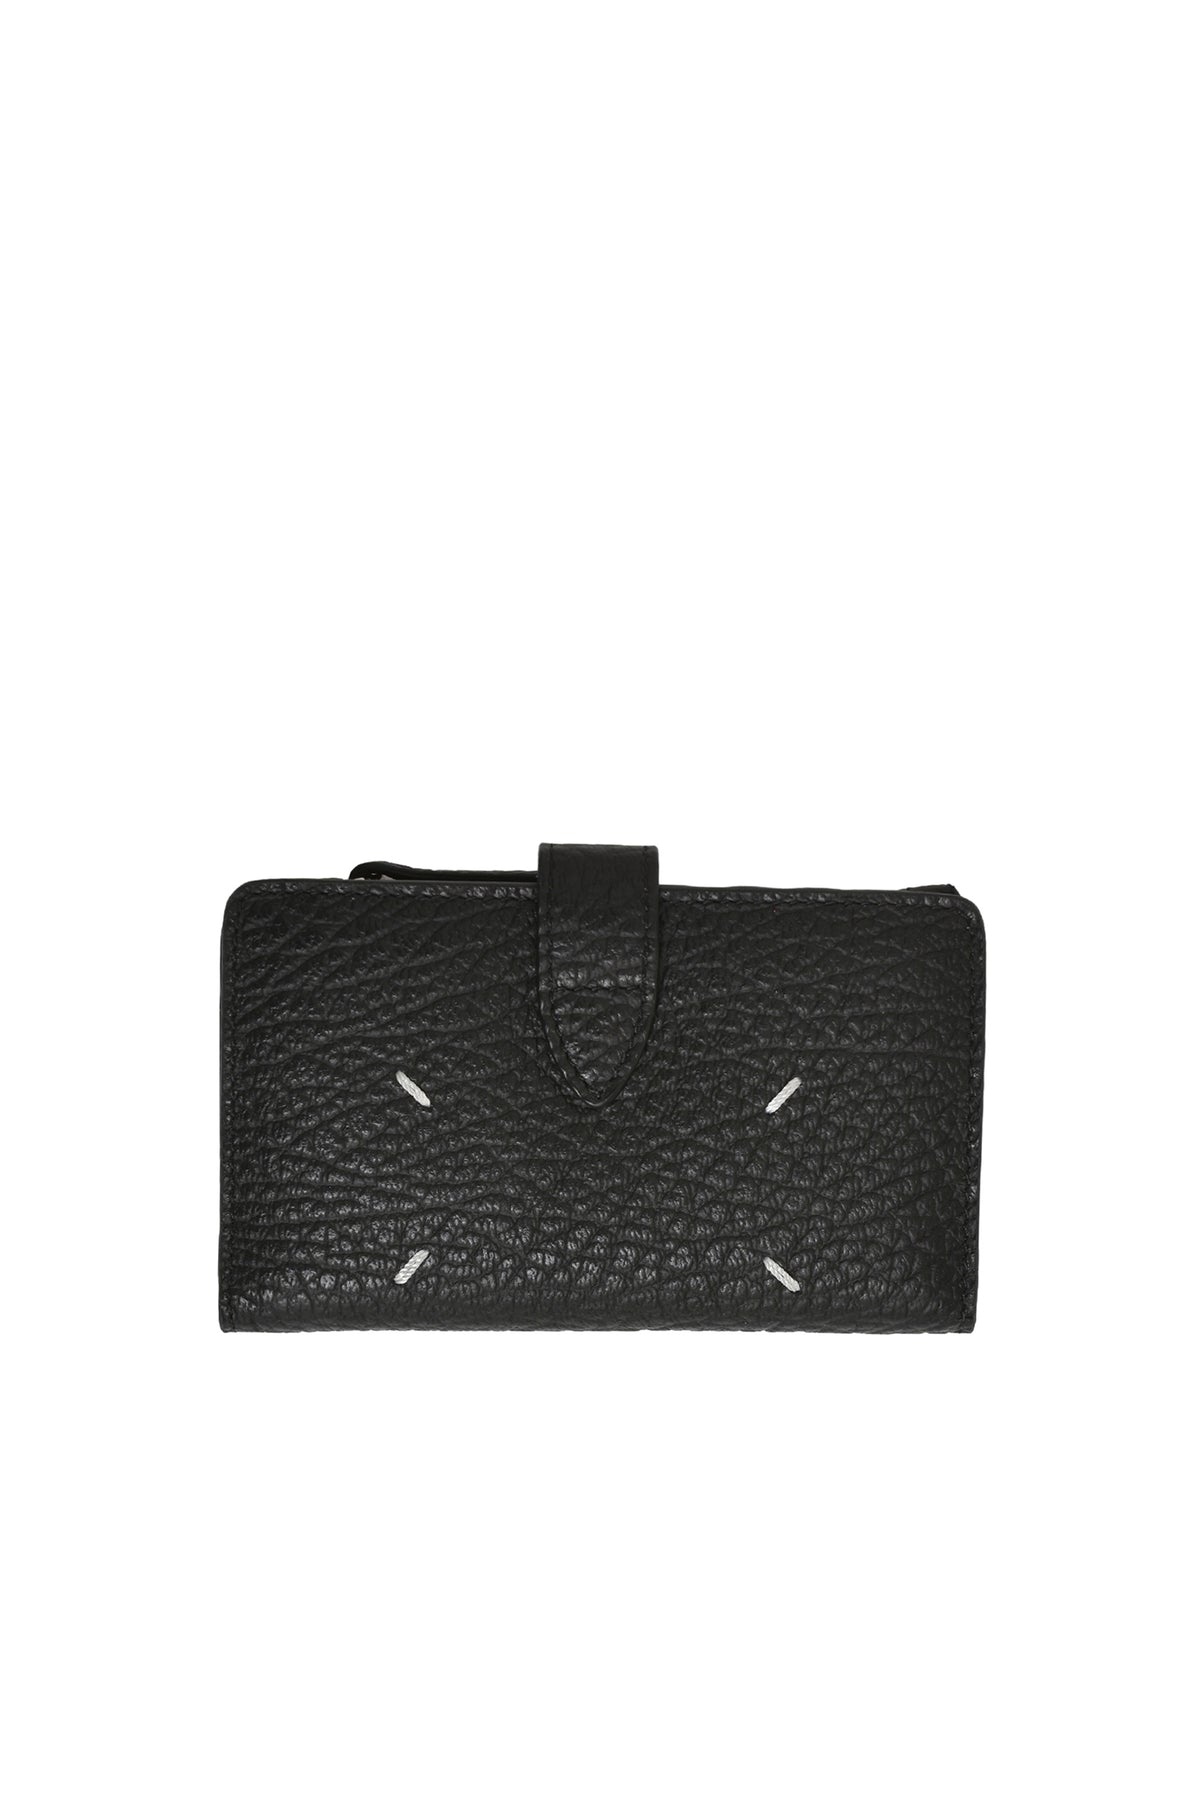 CARD HOLDER CLIP 2 WITH ZIP / BLK